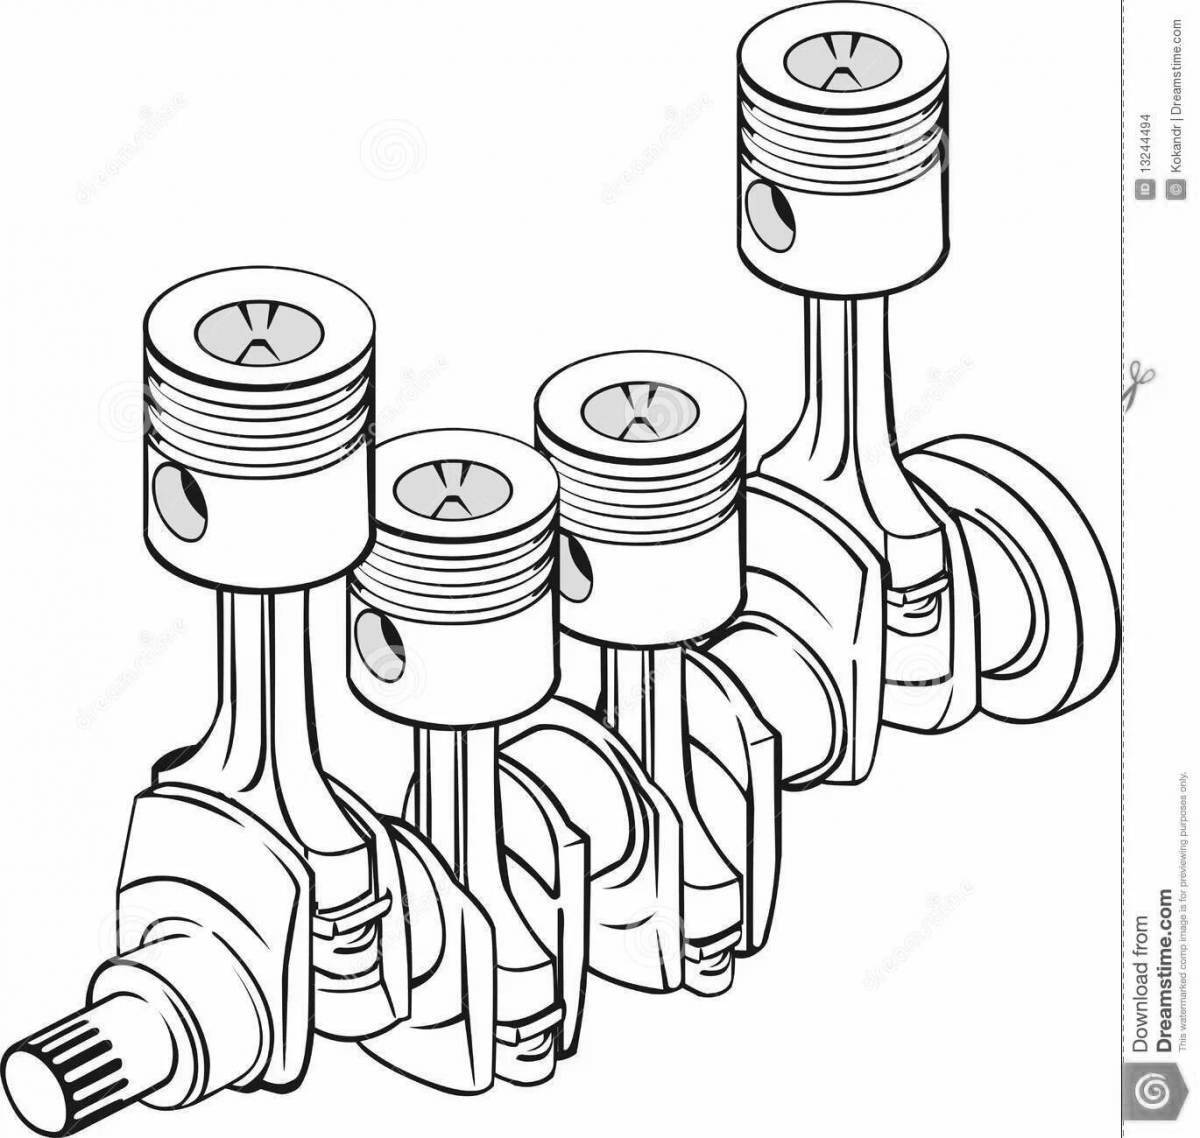 Shock Engine Coloring Page